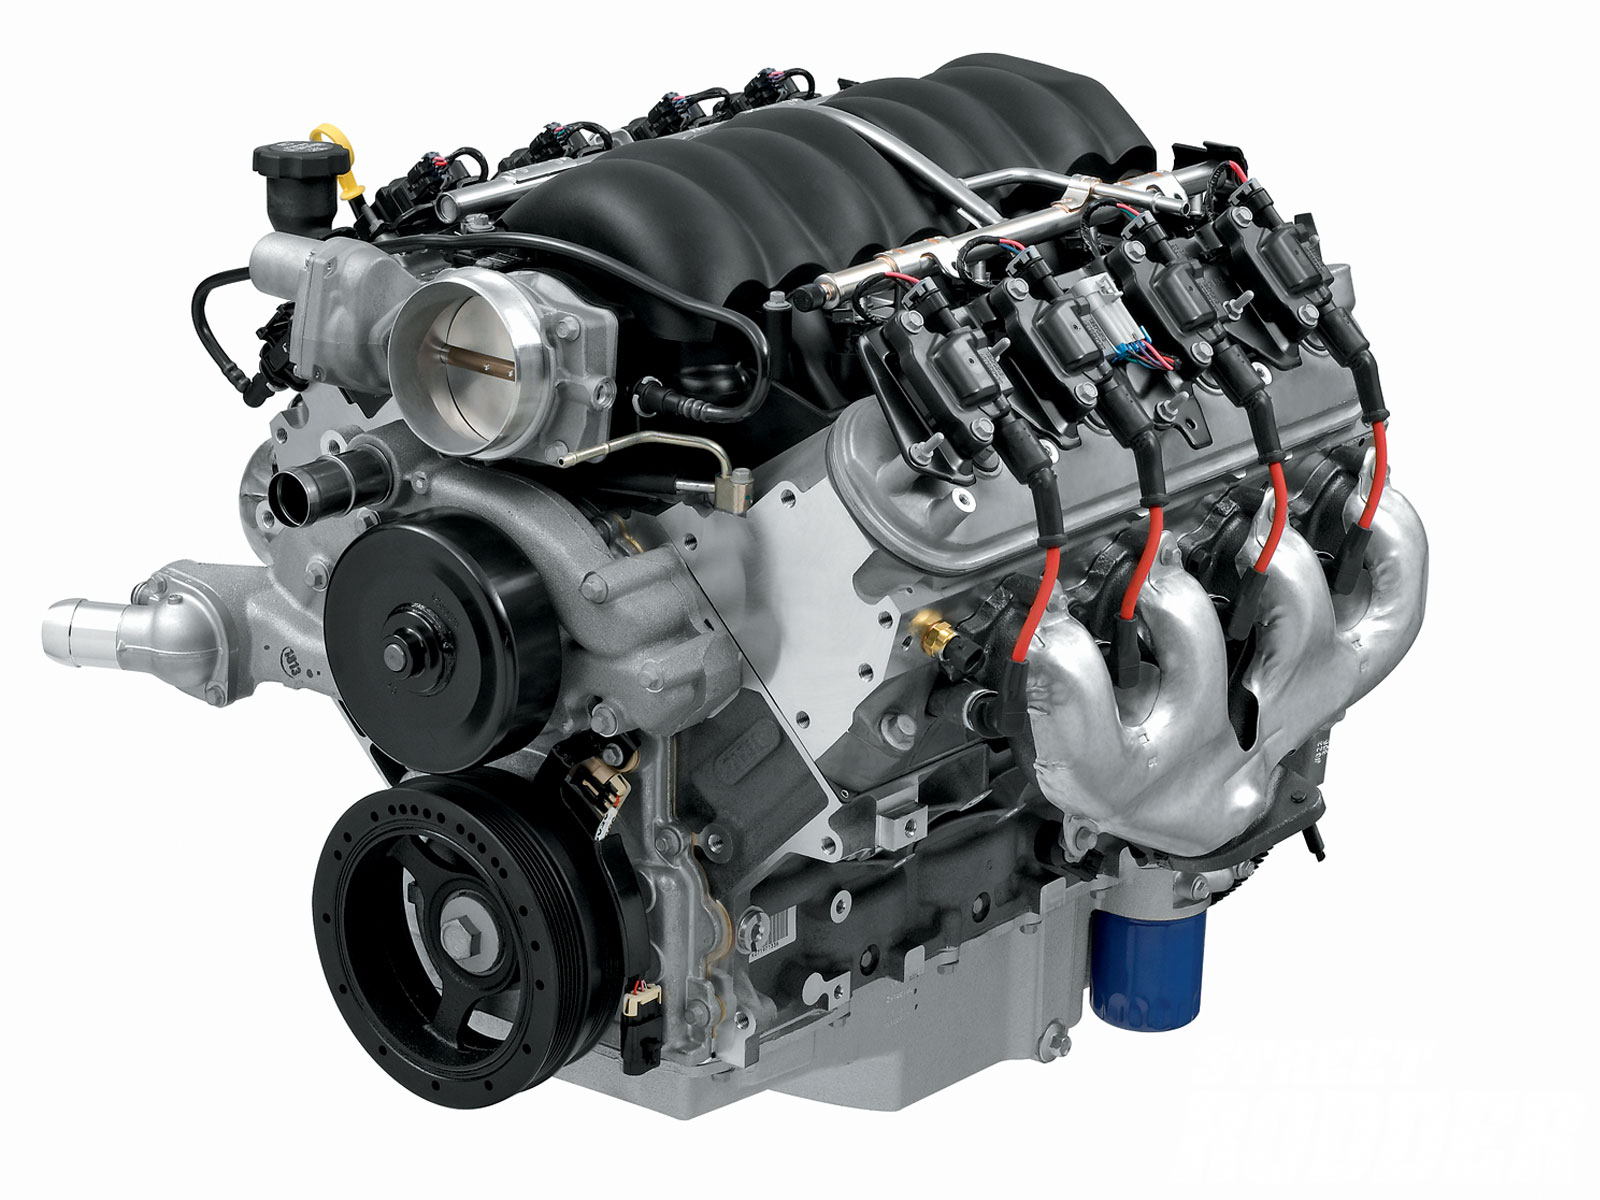 What is the difference between an engine and a motor?